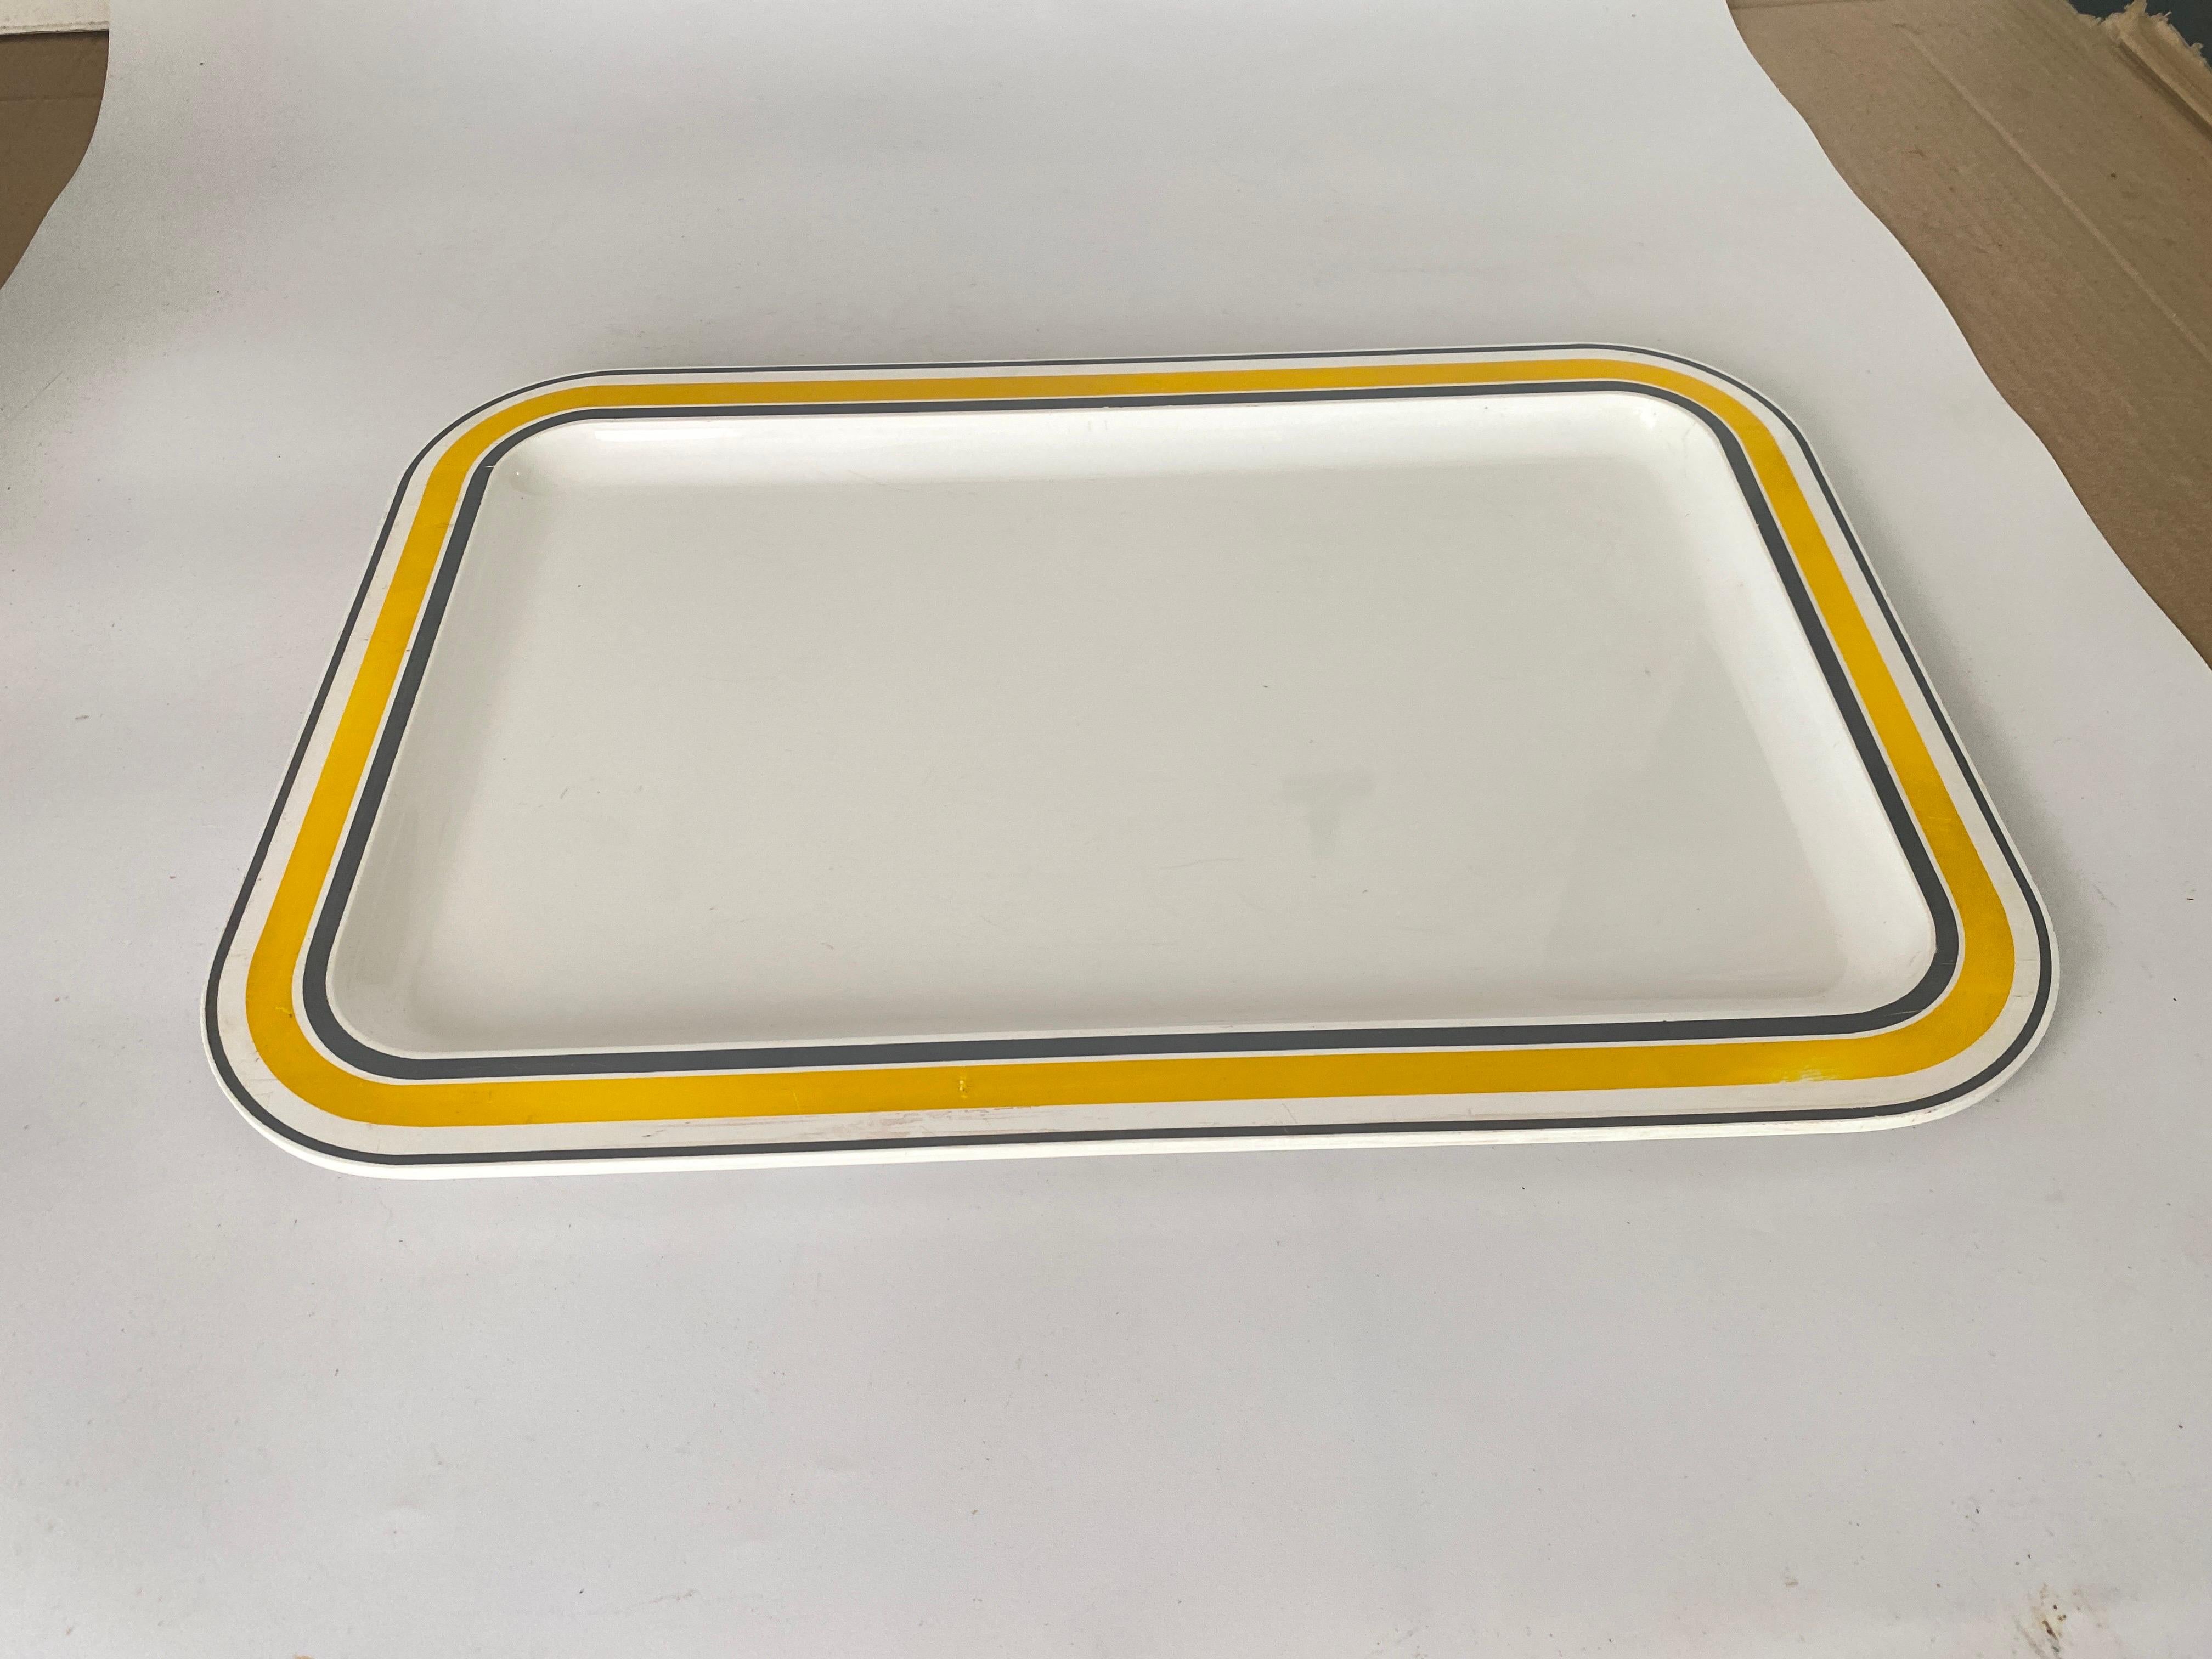 Plastic Tray France 1970s White yellow and grey Color For Sale 4